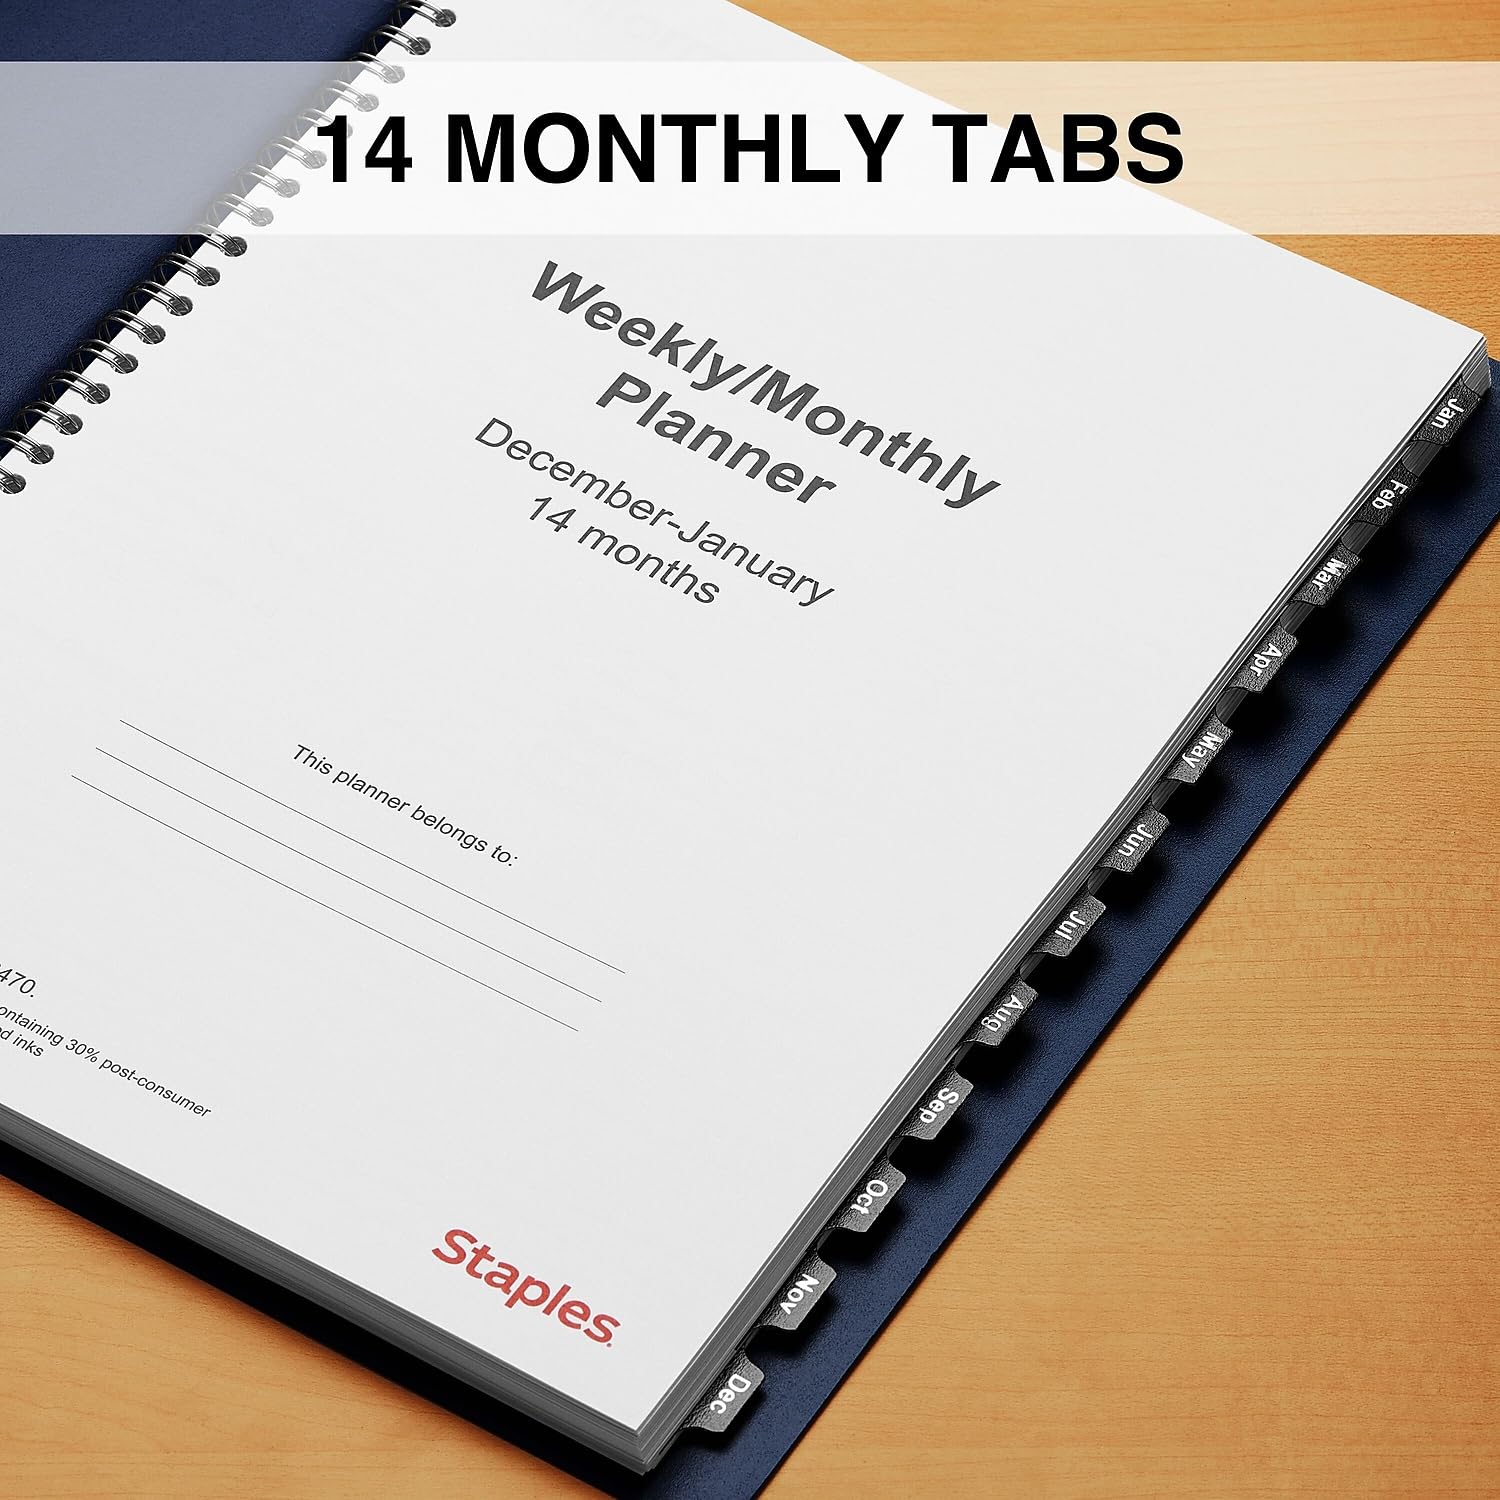 2024 Staples 8-inch x 11-inch Weekly & Monthly Appointment Book, Navy (TR58470-24)